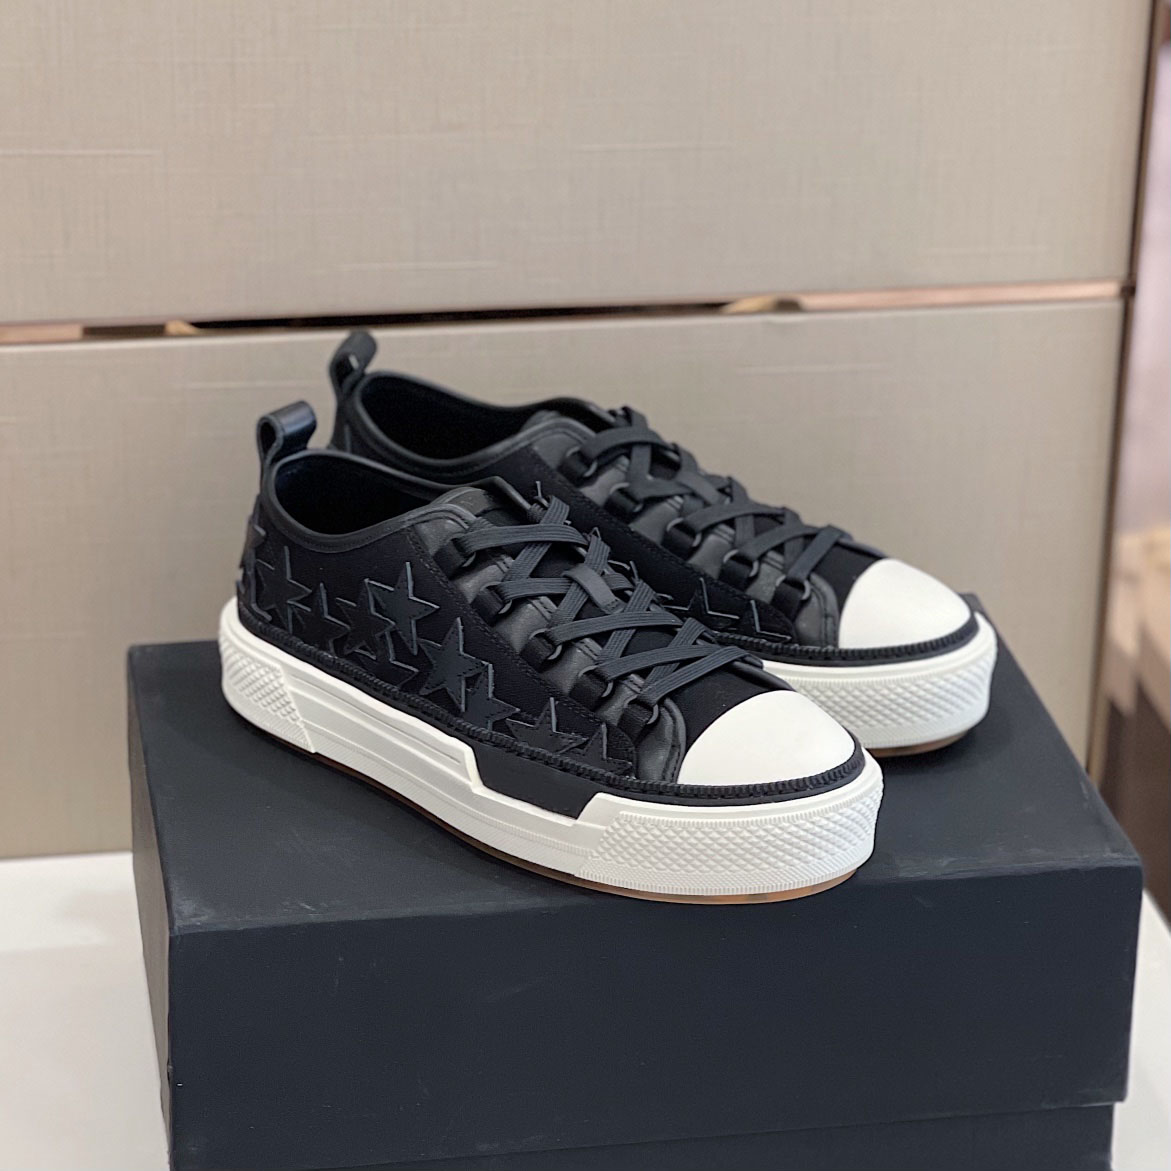 

Fashion Shoes Stars Court Low Sneakers Lace-up Canvas Trainers Embroidery Logo Los Angeles Street Style Stars Patches Ami Ri A Miri Original Box 35-45 Unisex, 2 as picture